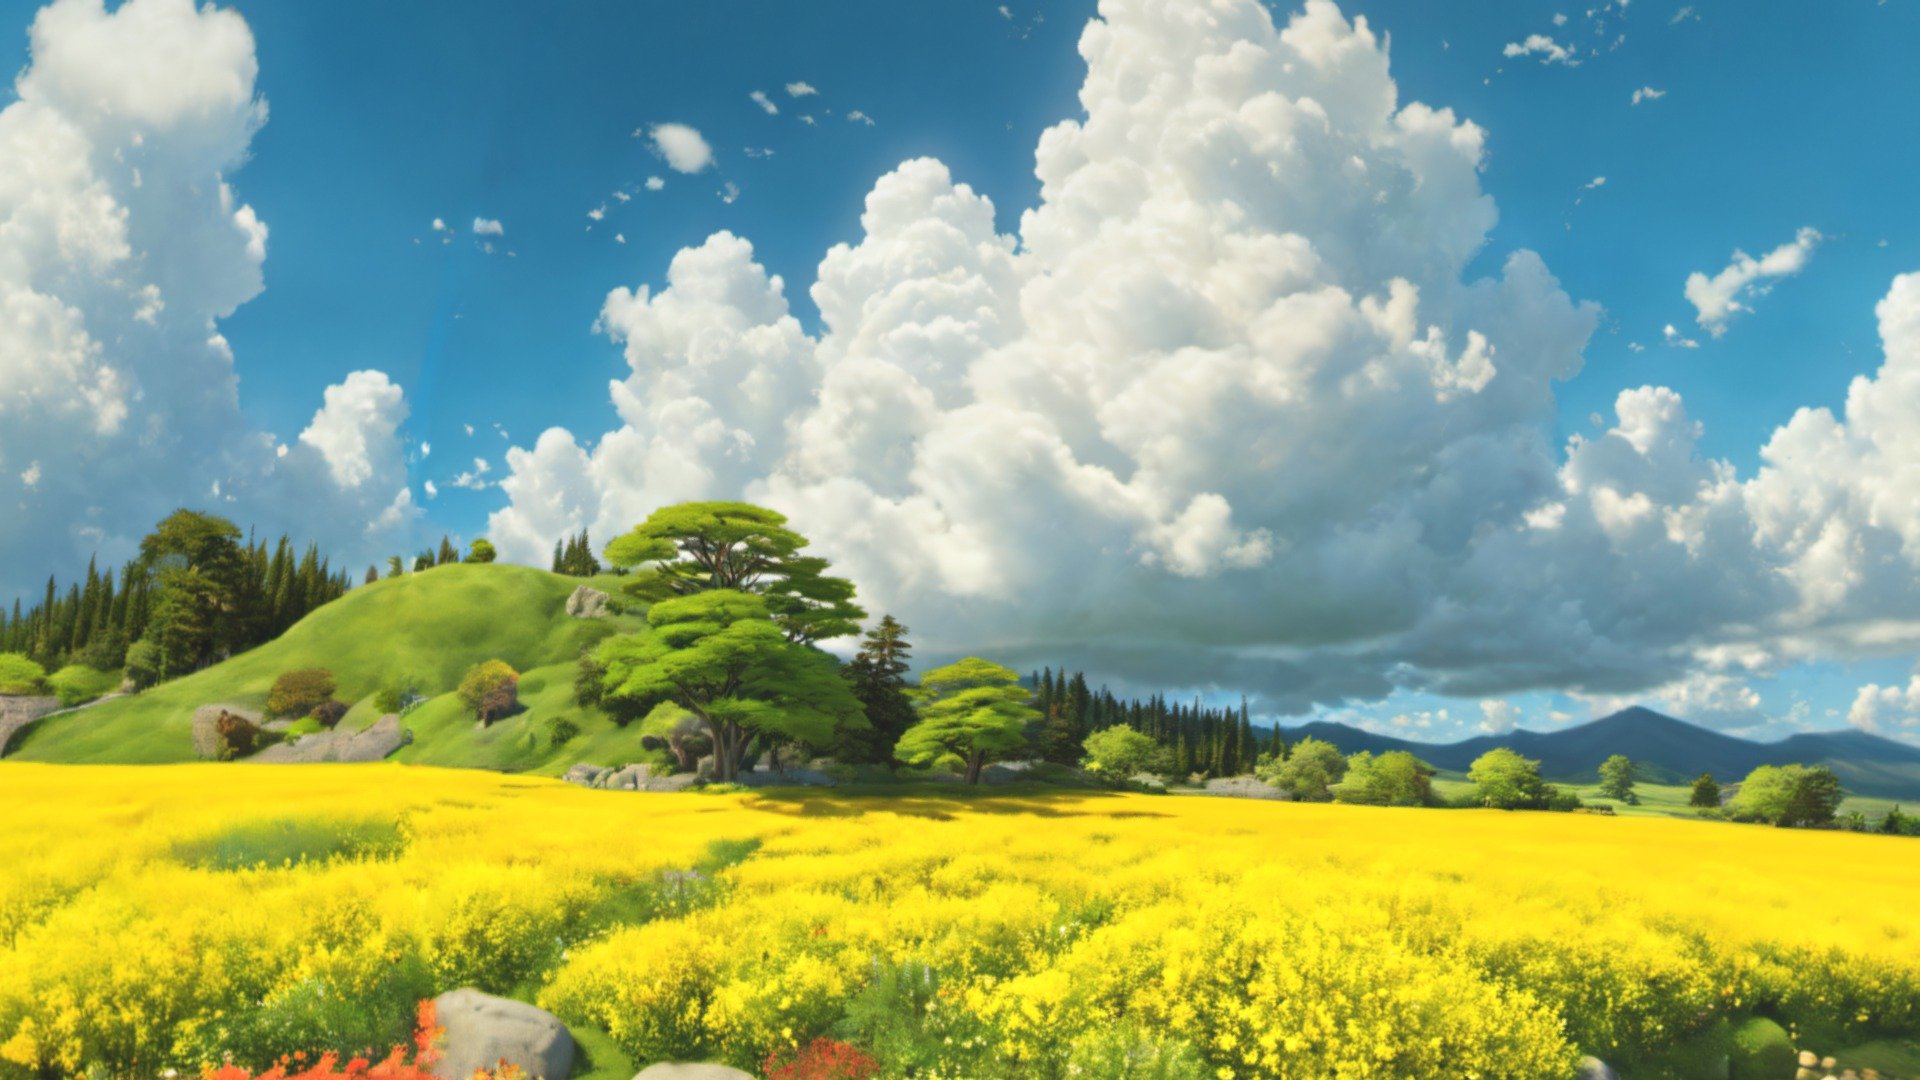 This is an 8k resolution (8192 x 4096) HDRI equirectangular panorama which will help you create 360 degrees Cartoony and Stylized landscapes in different 3d software (Blender, Unreal Engine, Unity, 3dMax and many others). It is perfect for games, virtual reality, 3d renders, movies etc. The image was created with AI and edited in different 2d and 3d software to improve quality, remove seams and make it perfect for any 3d or 2d Cartoon/Stylized project.

The image comes in 2 formats: .hdr and .jpg - HDRI Cartoon Panorama E - Buy Royalty Free 3D model by Ionut81 3d model